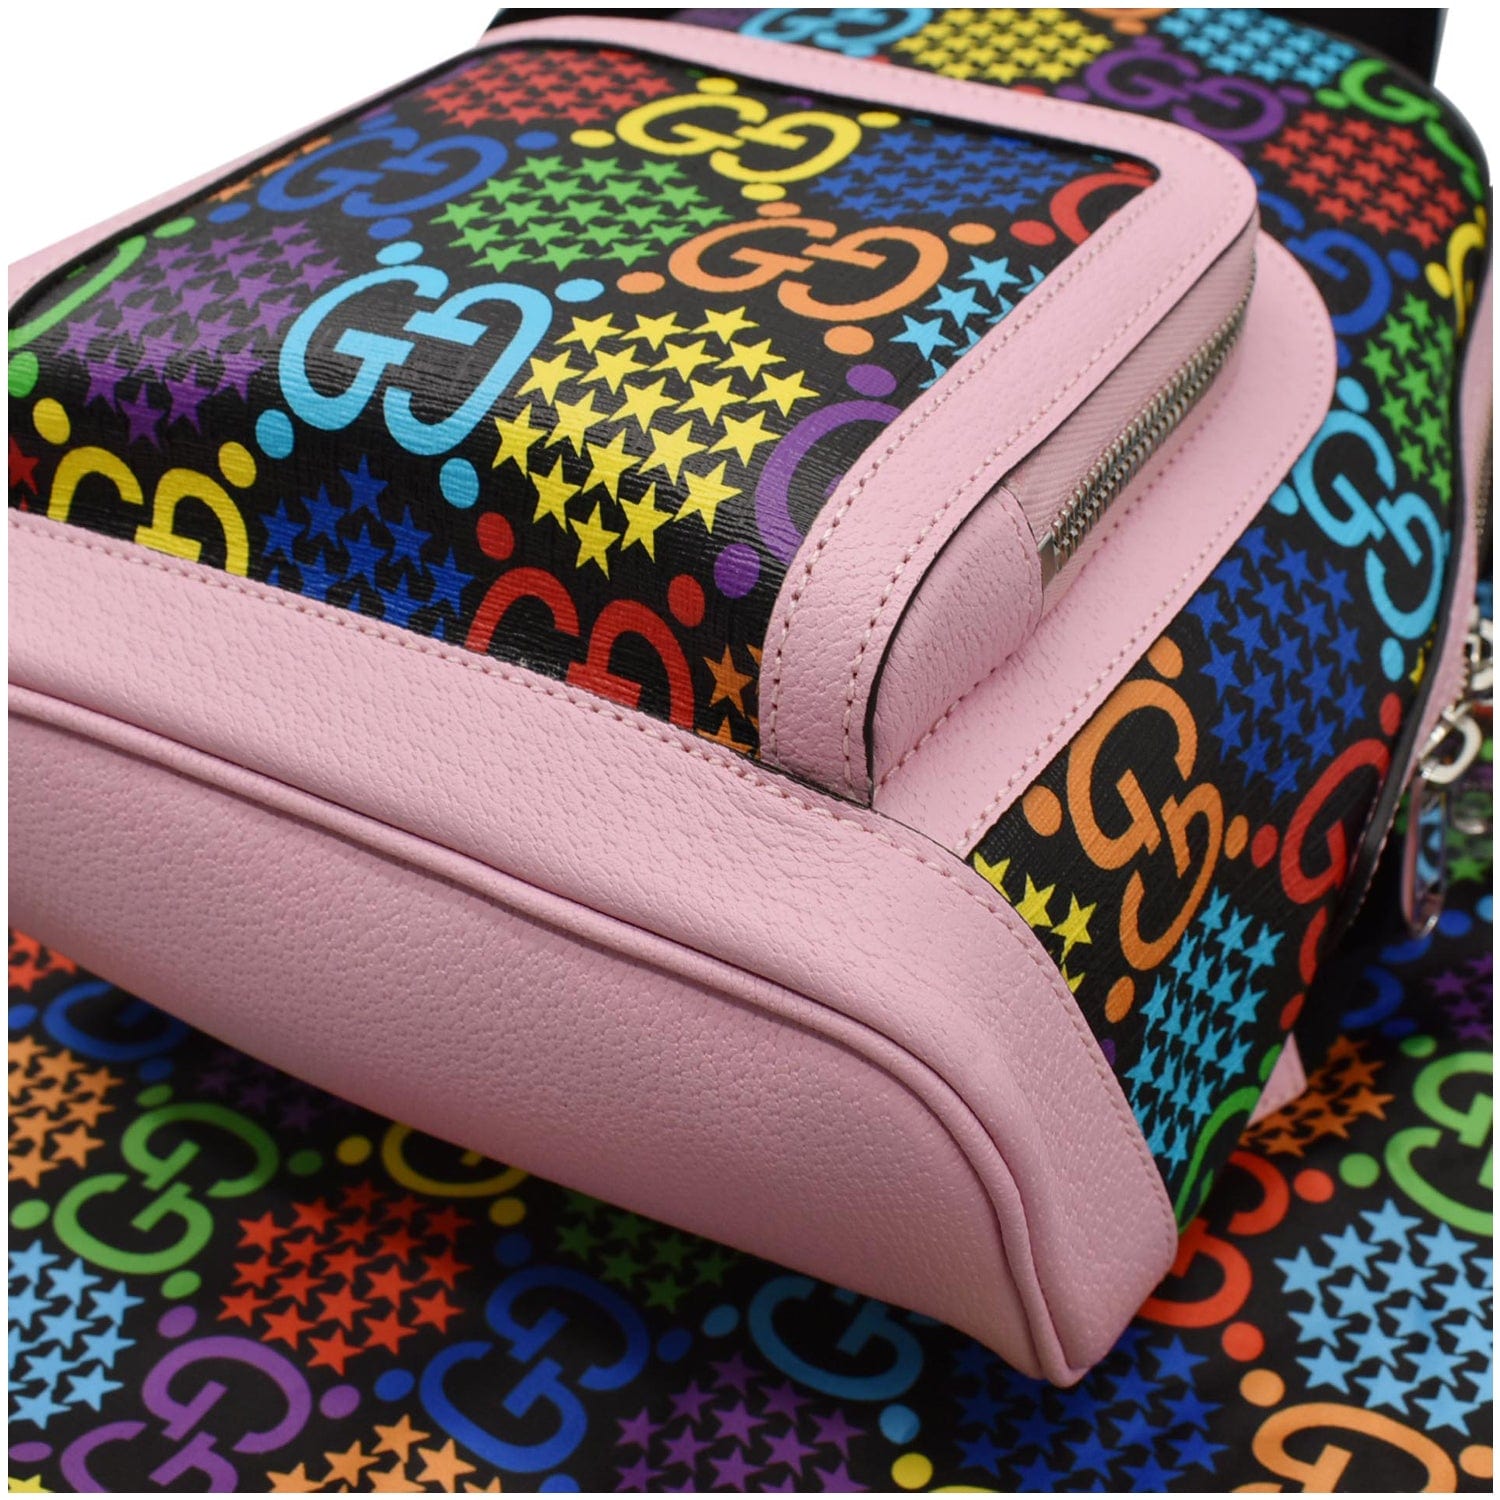 Gucci GG Supreme Monogram Psychedelic Small Backpack Pink Multicolor -  Tabita Bags – Tabita Bags with Love